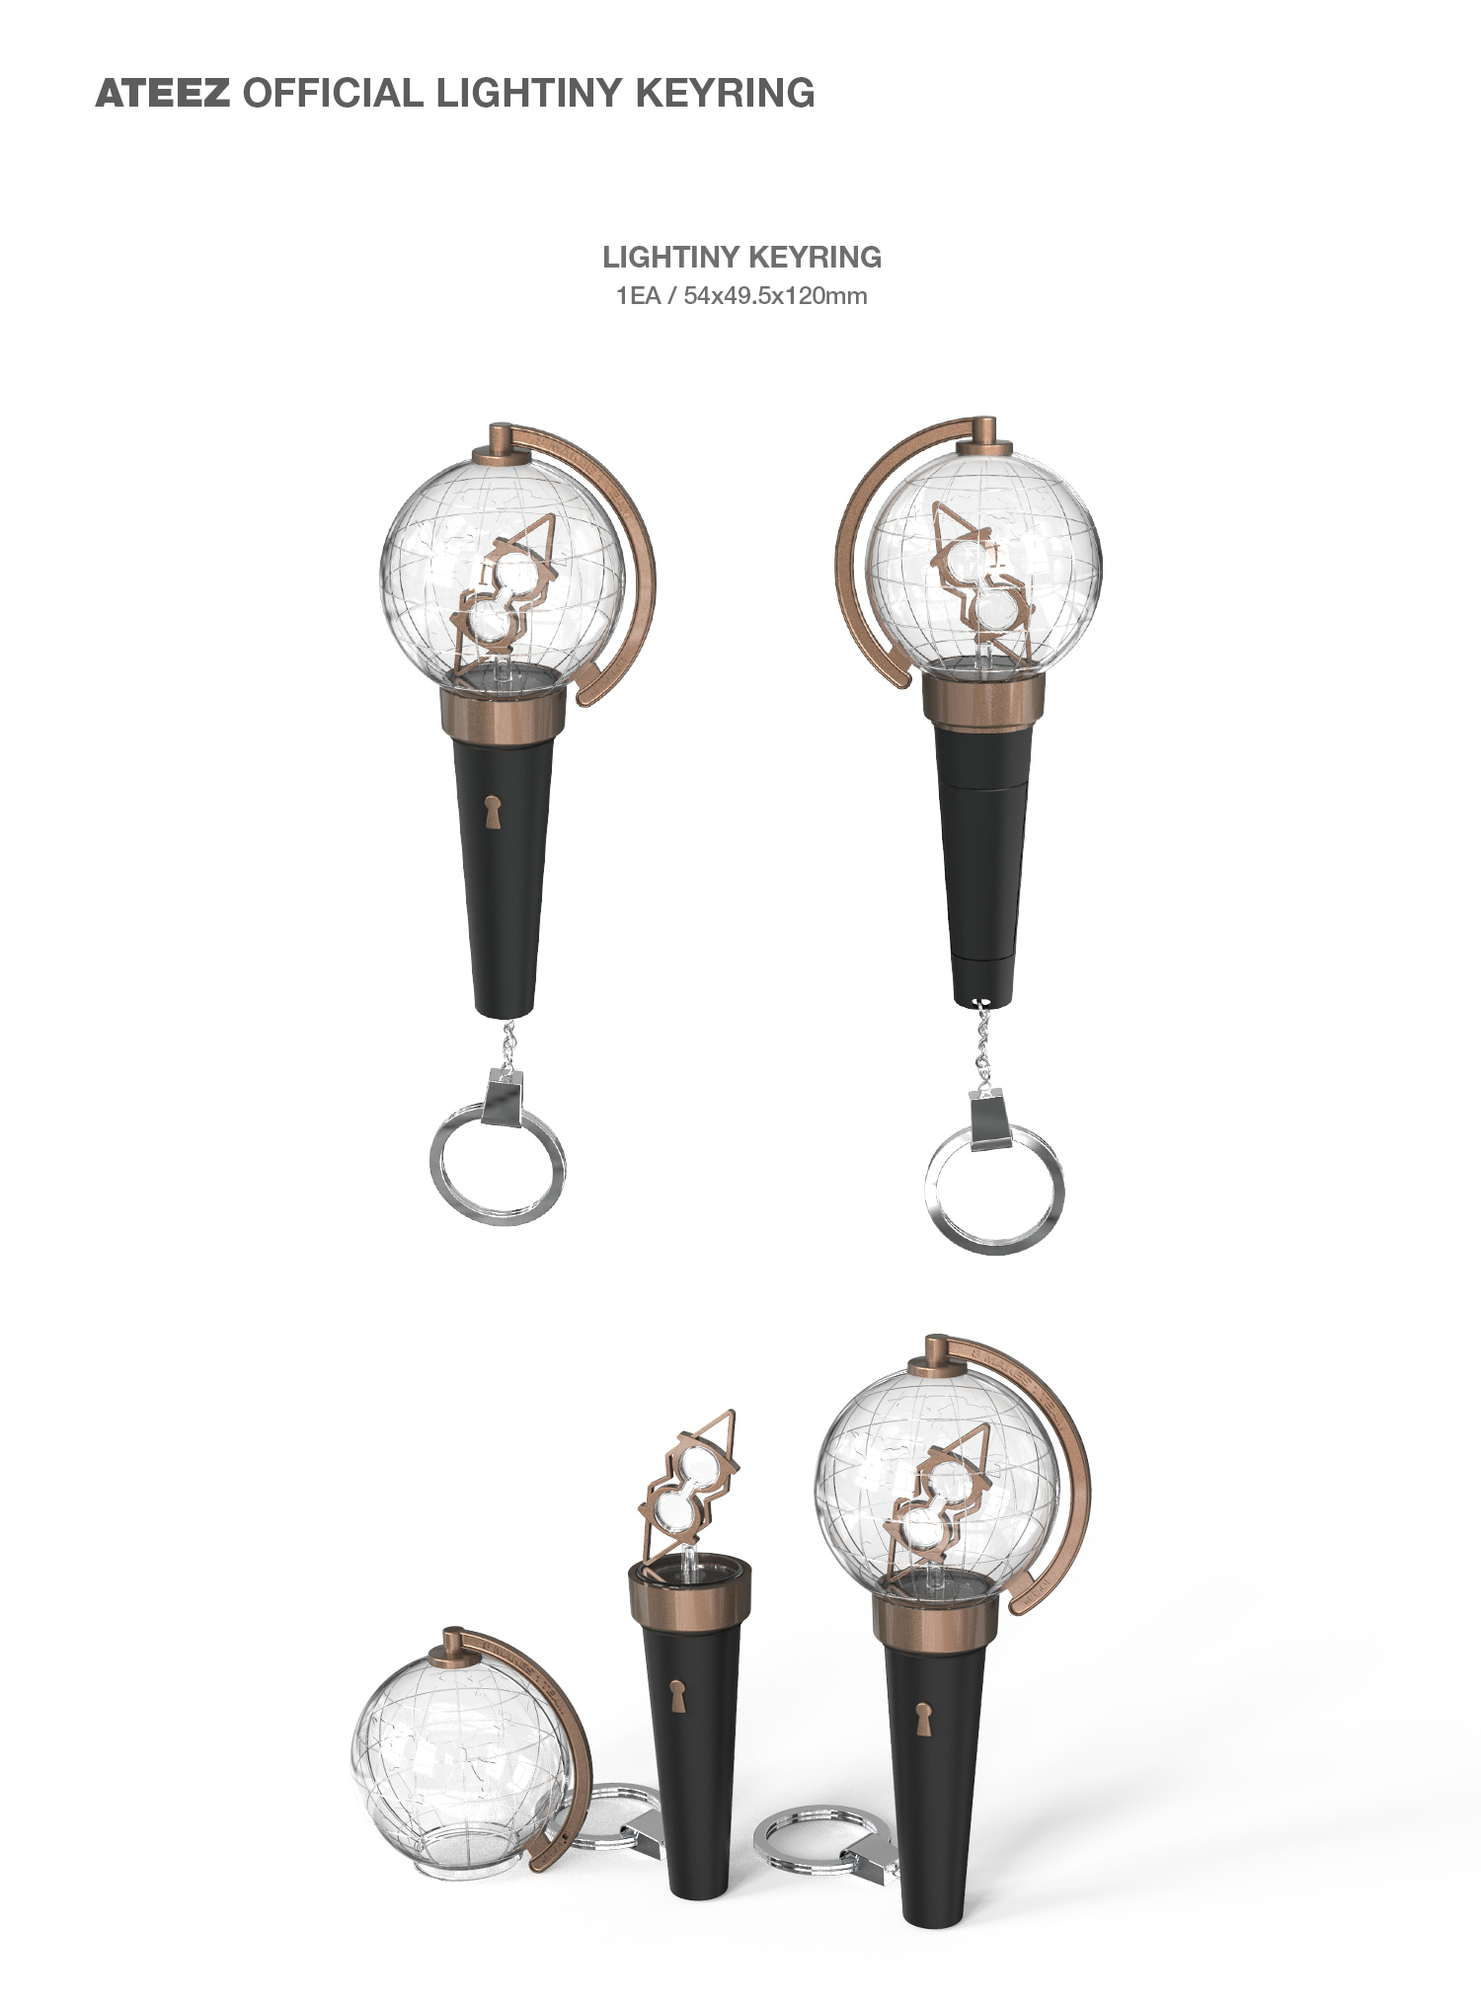 OFFICIAL LIGHTINY KEYRING | ATEEZ JAPAN OFFICIAL SITE